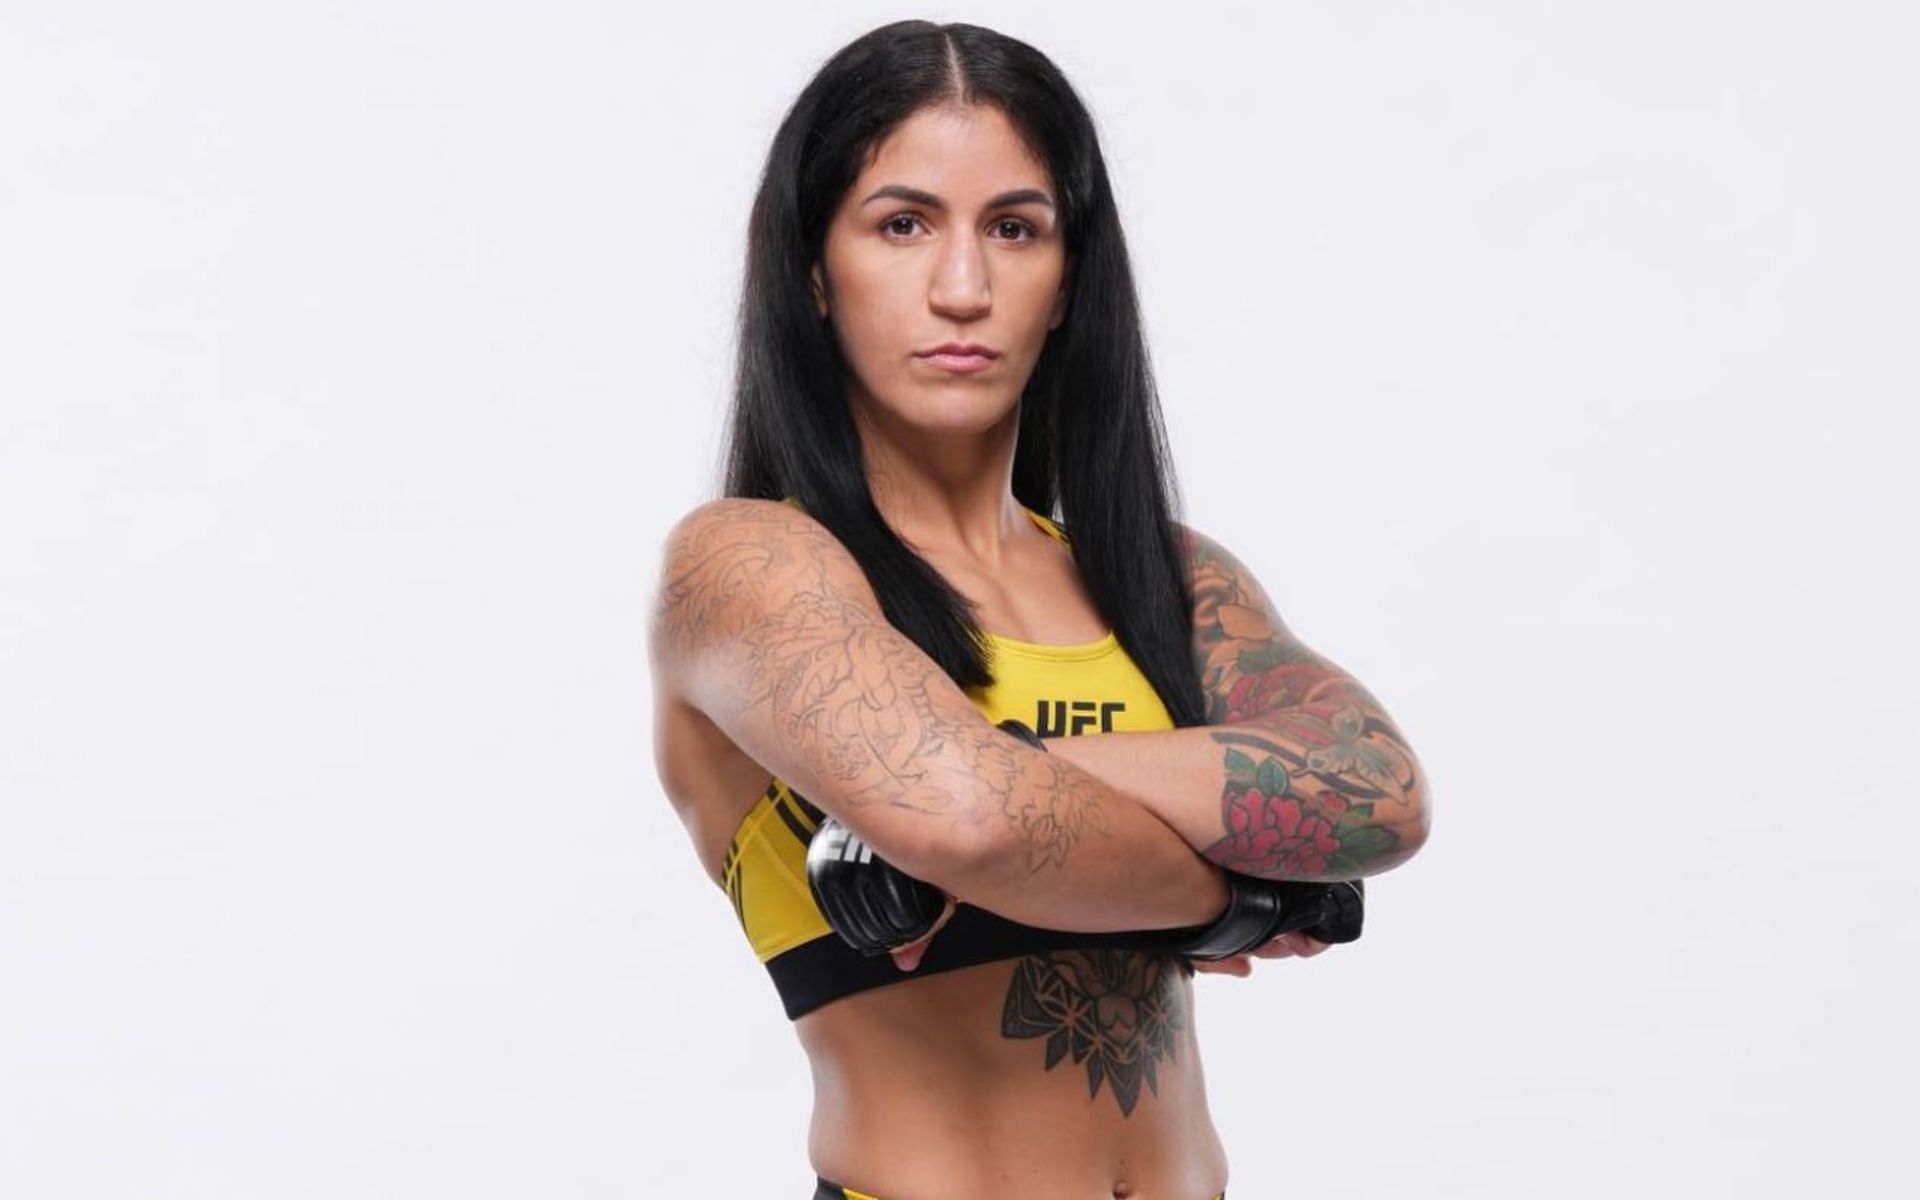 Pannie Kianzad from her bout with Ketlen Vieira at UFC London [Photo Courtesy @panniekianzad on Instagram]